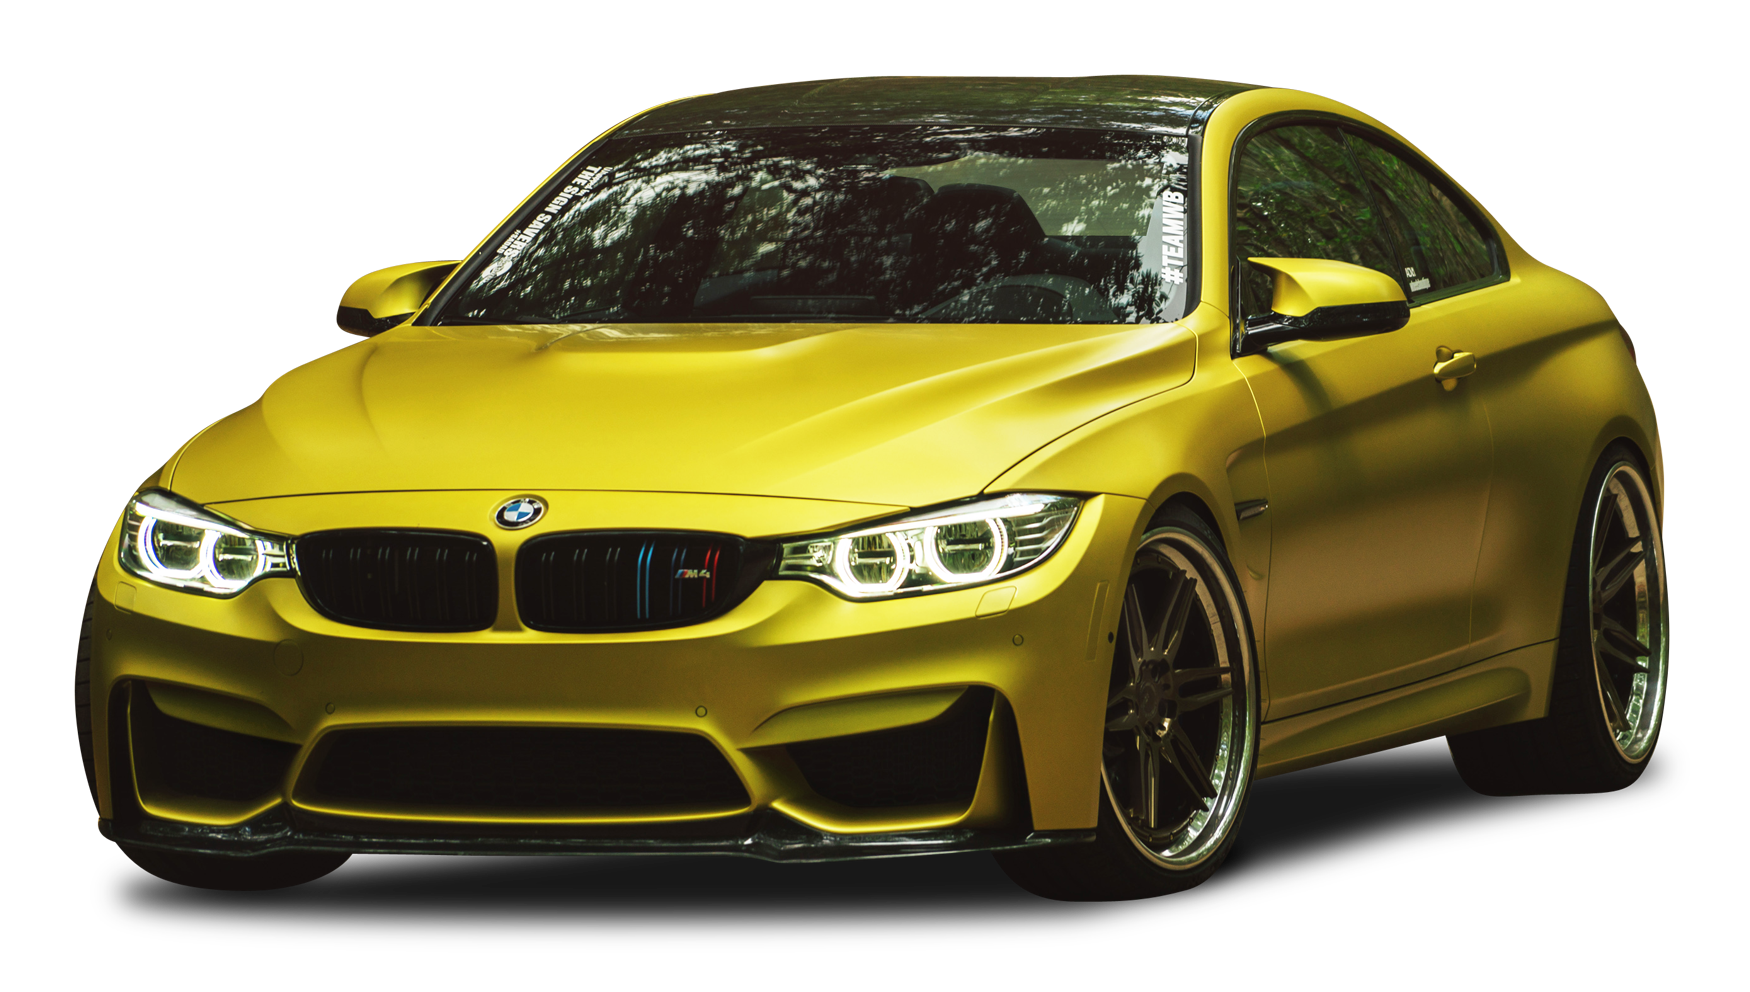 A Yellow Sports Car With Black Background